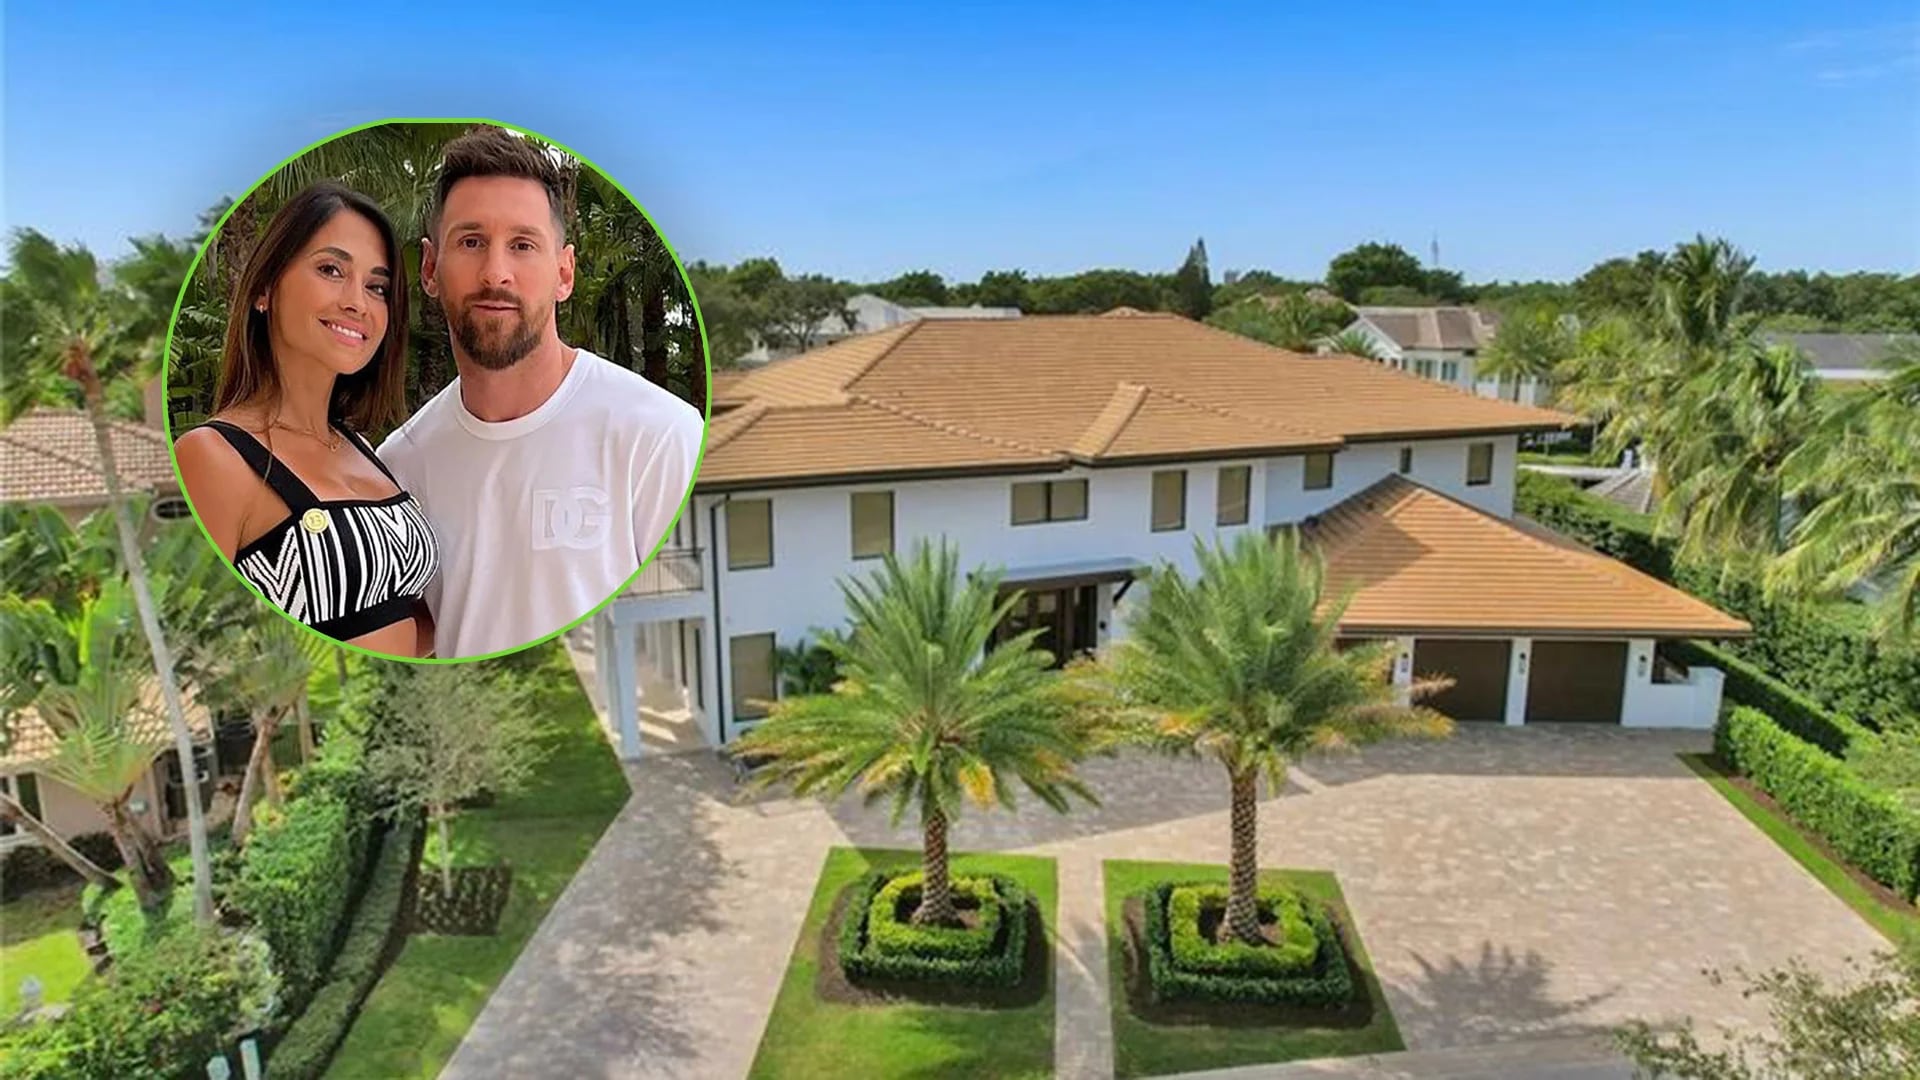 The house Messi bought in Miami